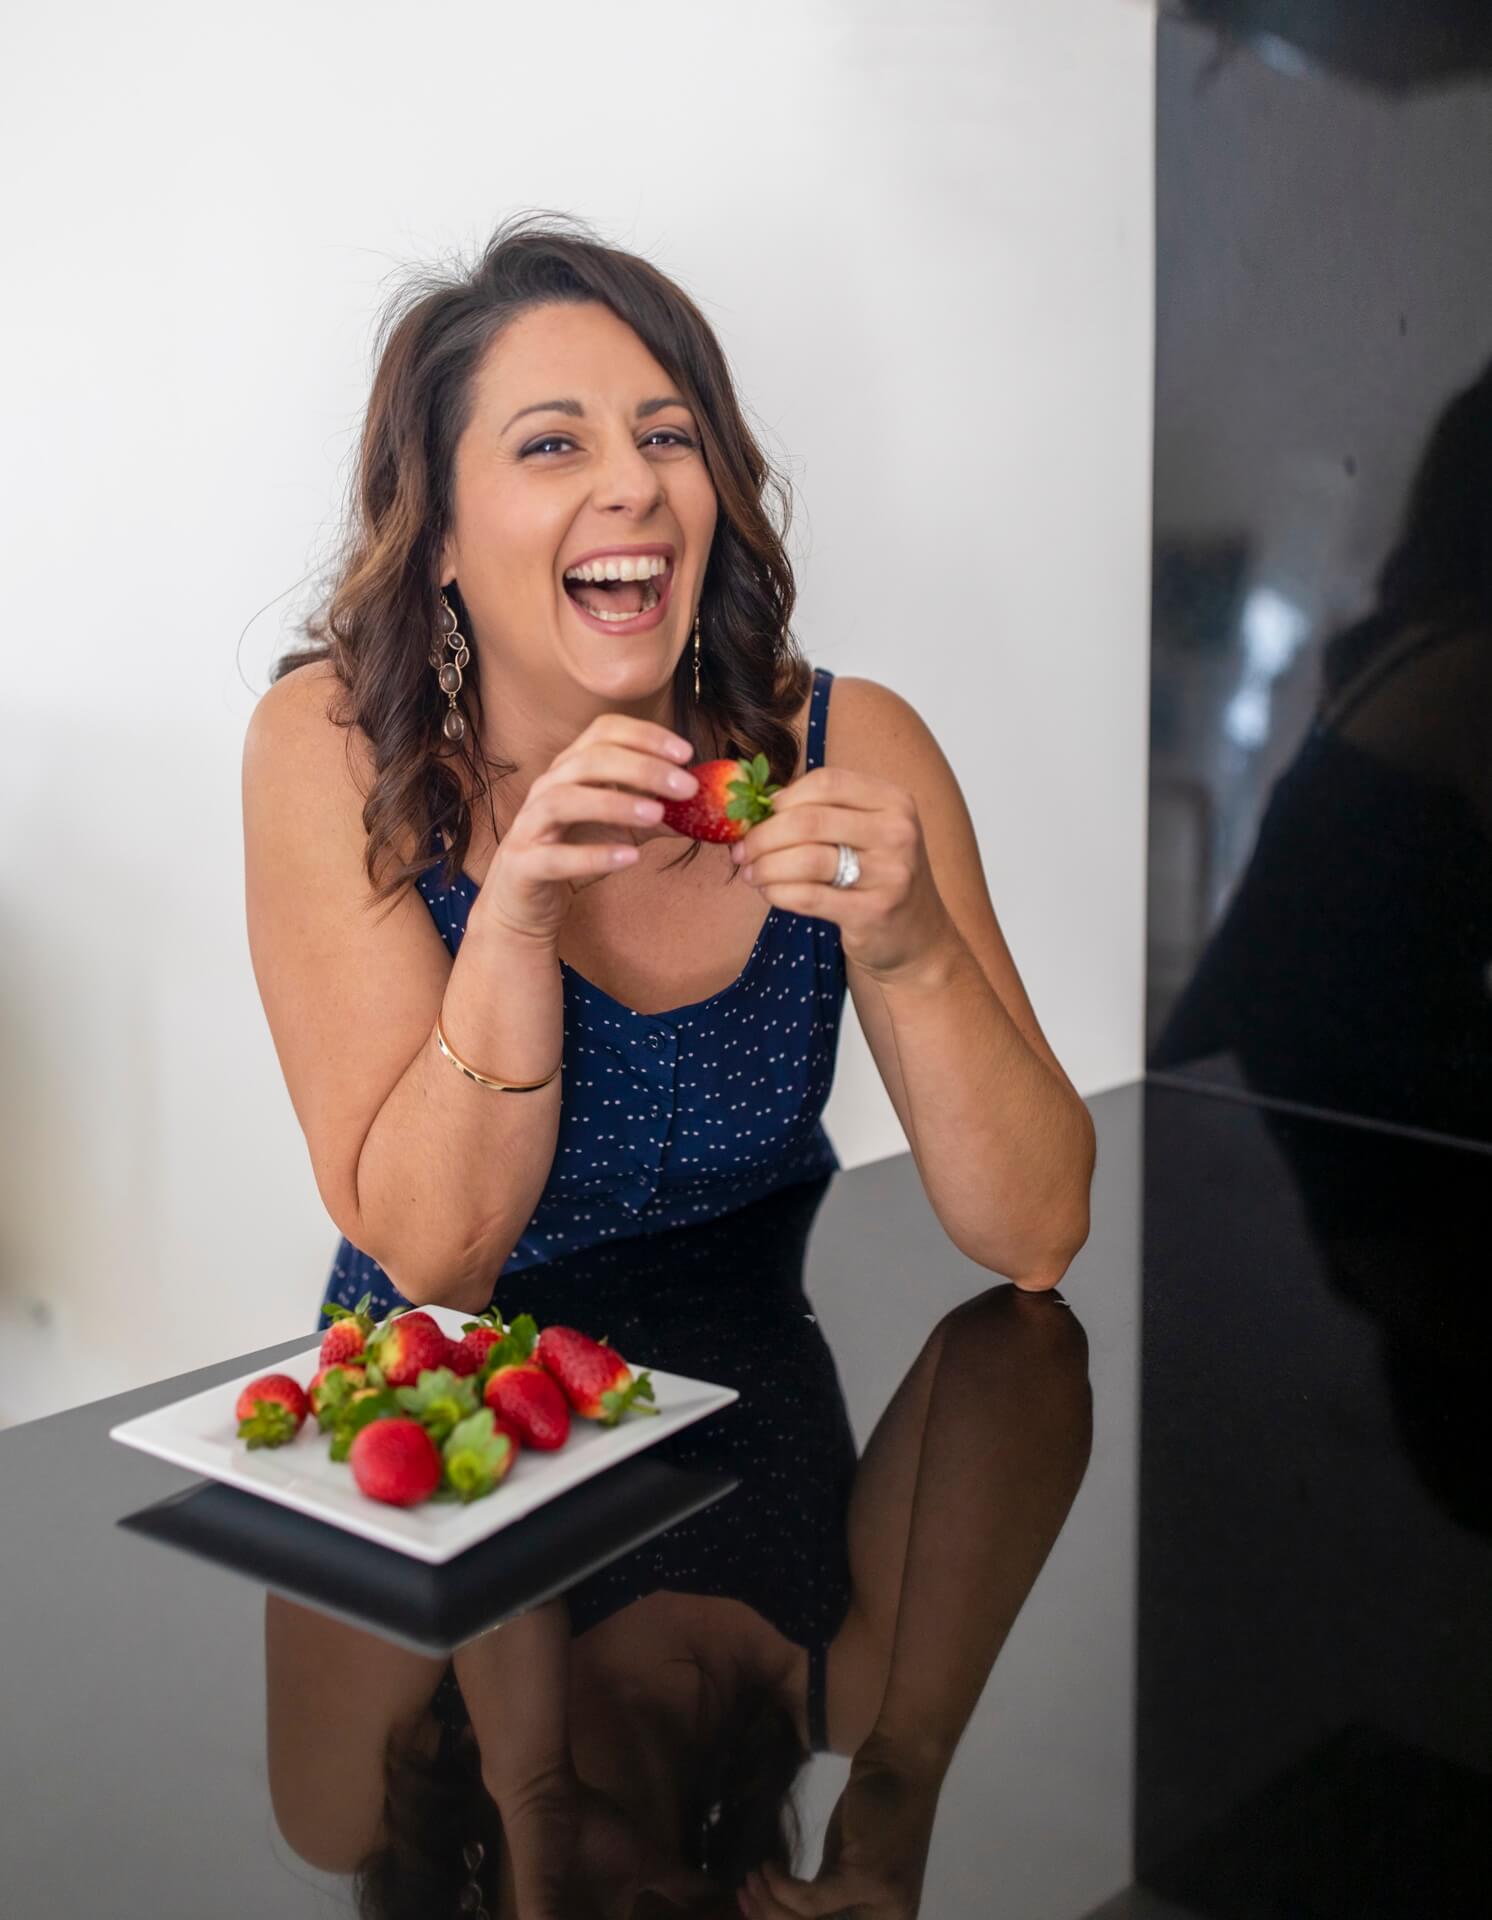 woman sitting at the bench laughing with a plate of strawberries and a strawberry in hand